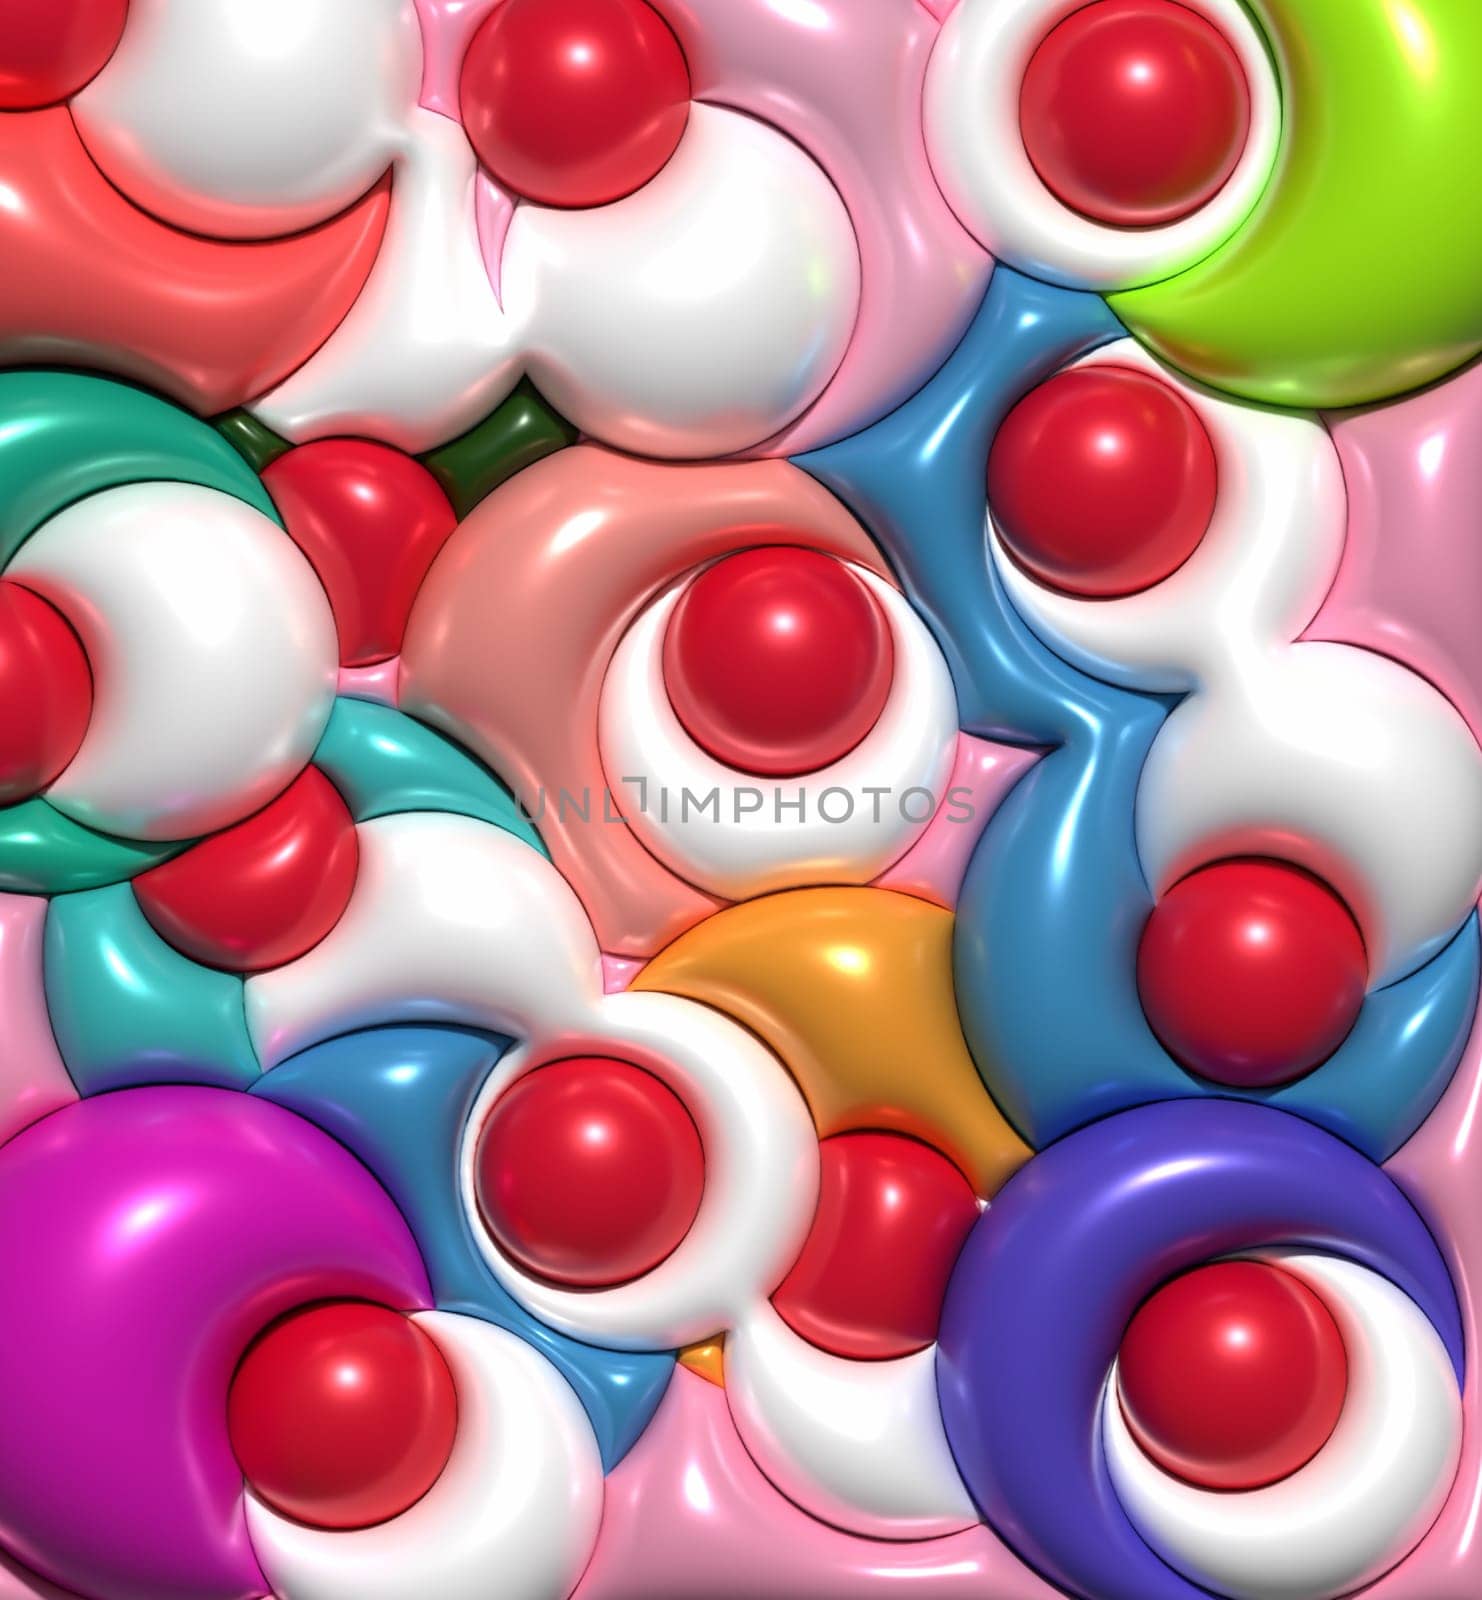 Inflated colorful circles, 3D rendering illustration by ndanko